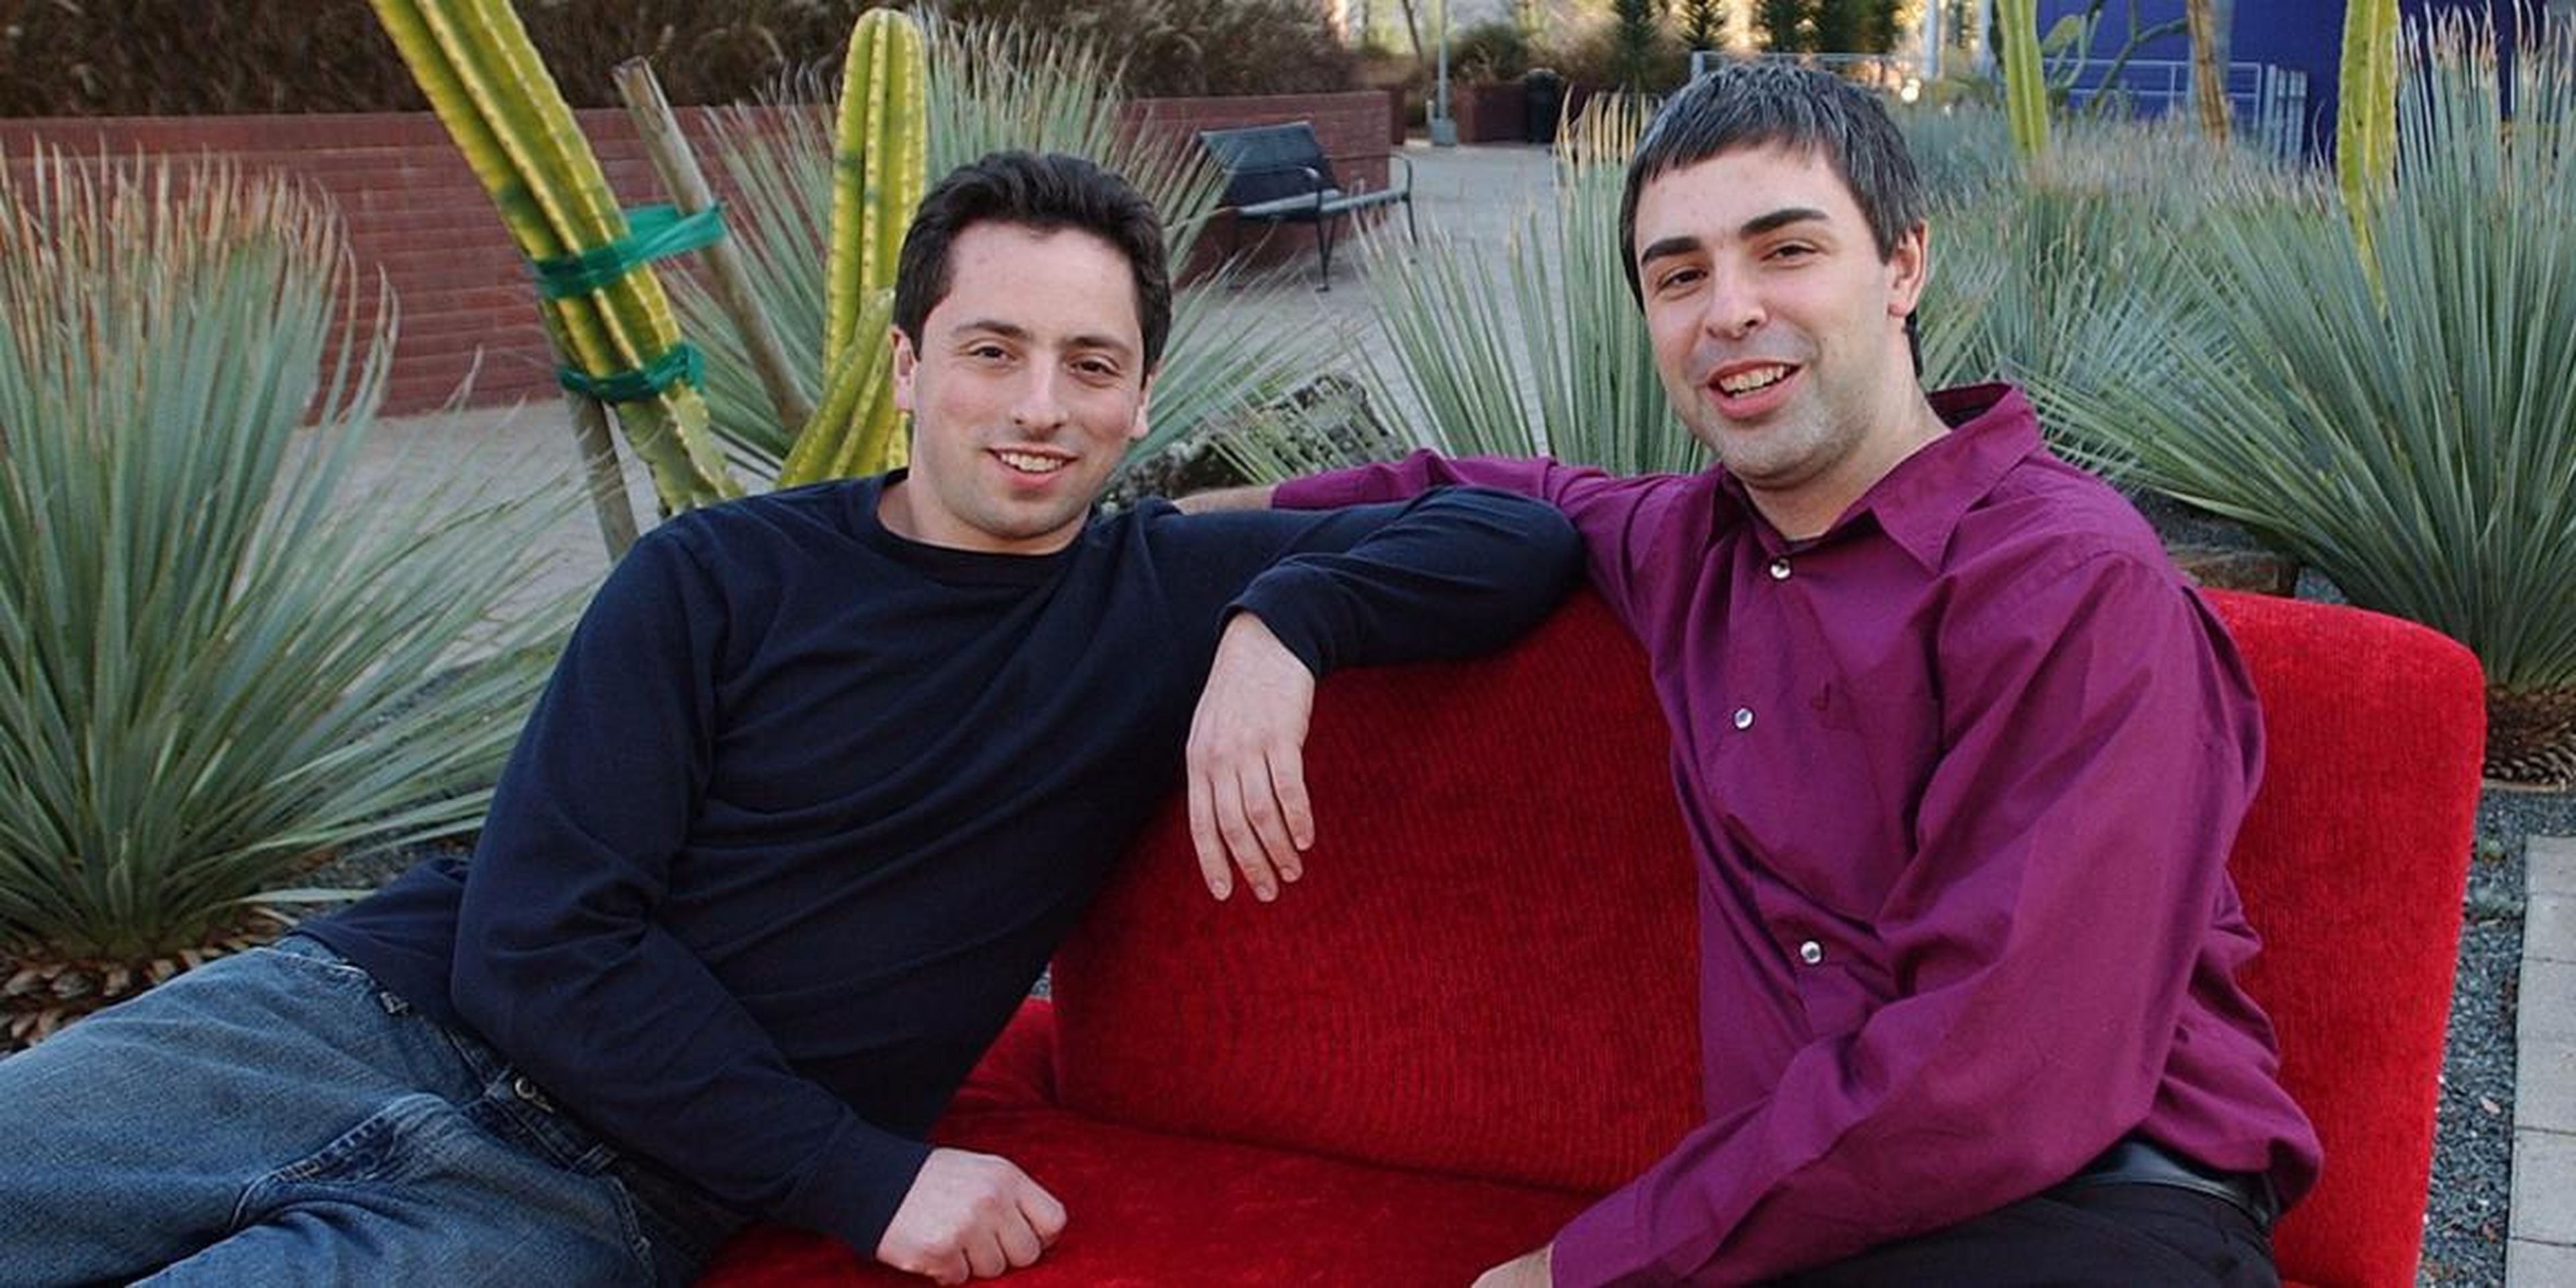 Google founders Sergey Brin and Larry Page back in the company's early days.